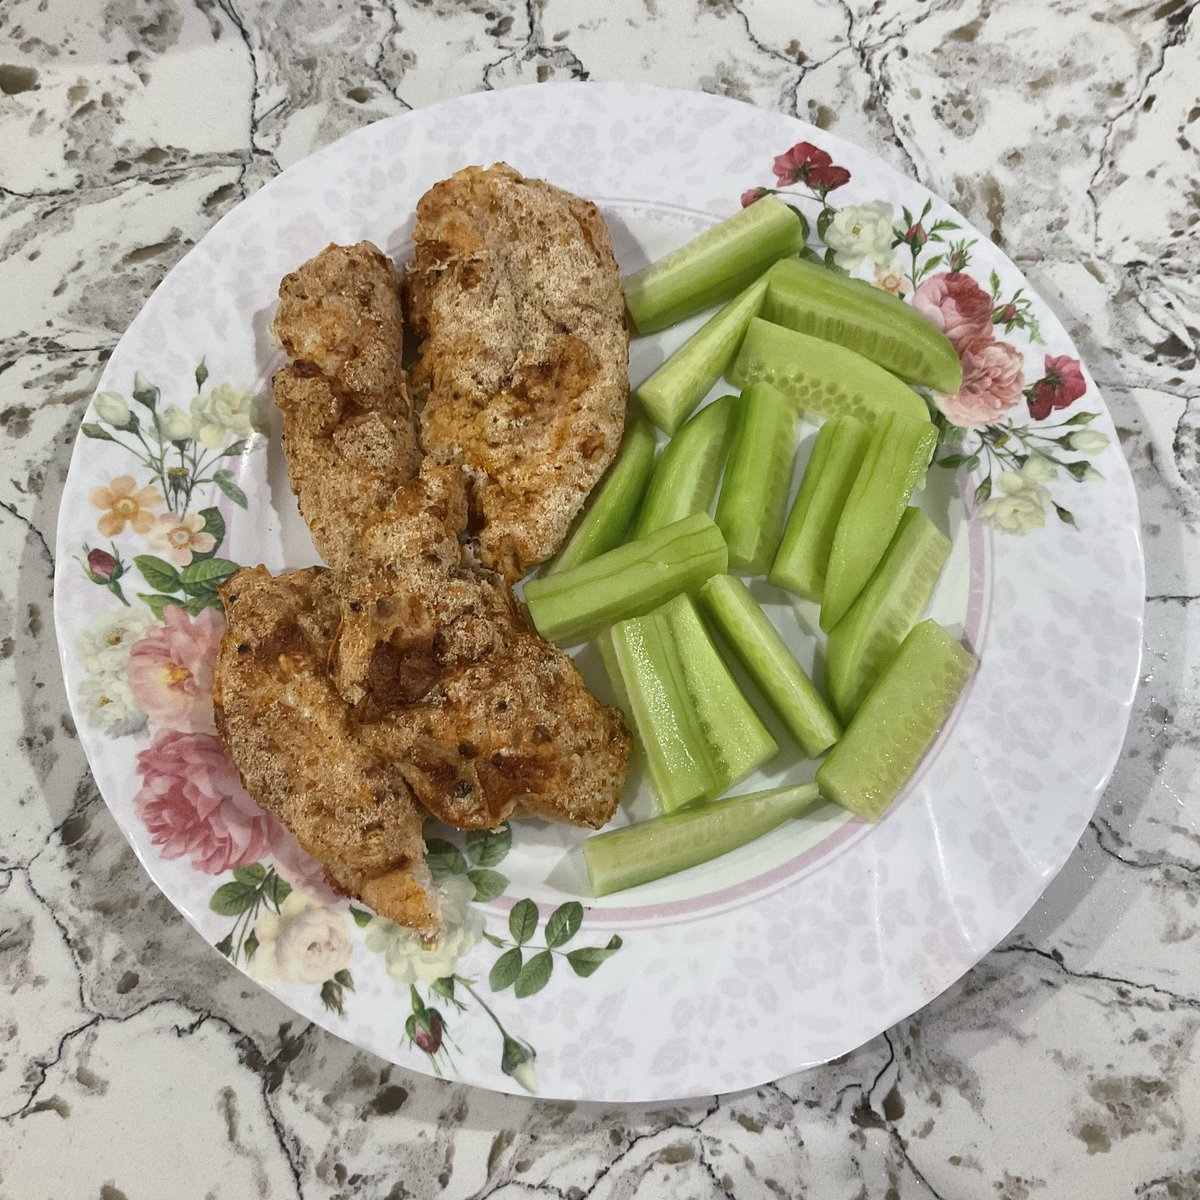 dinner! air fried chicken tenders and cucumber

284kcal, 55g protein, 1g carbs, 4g fats